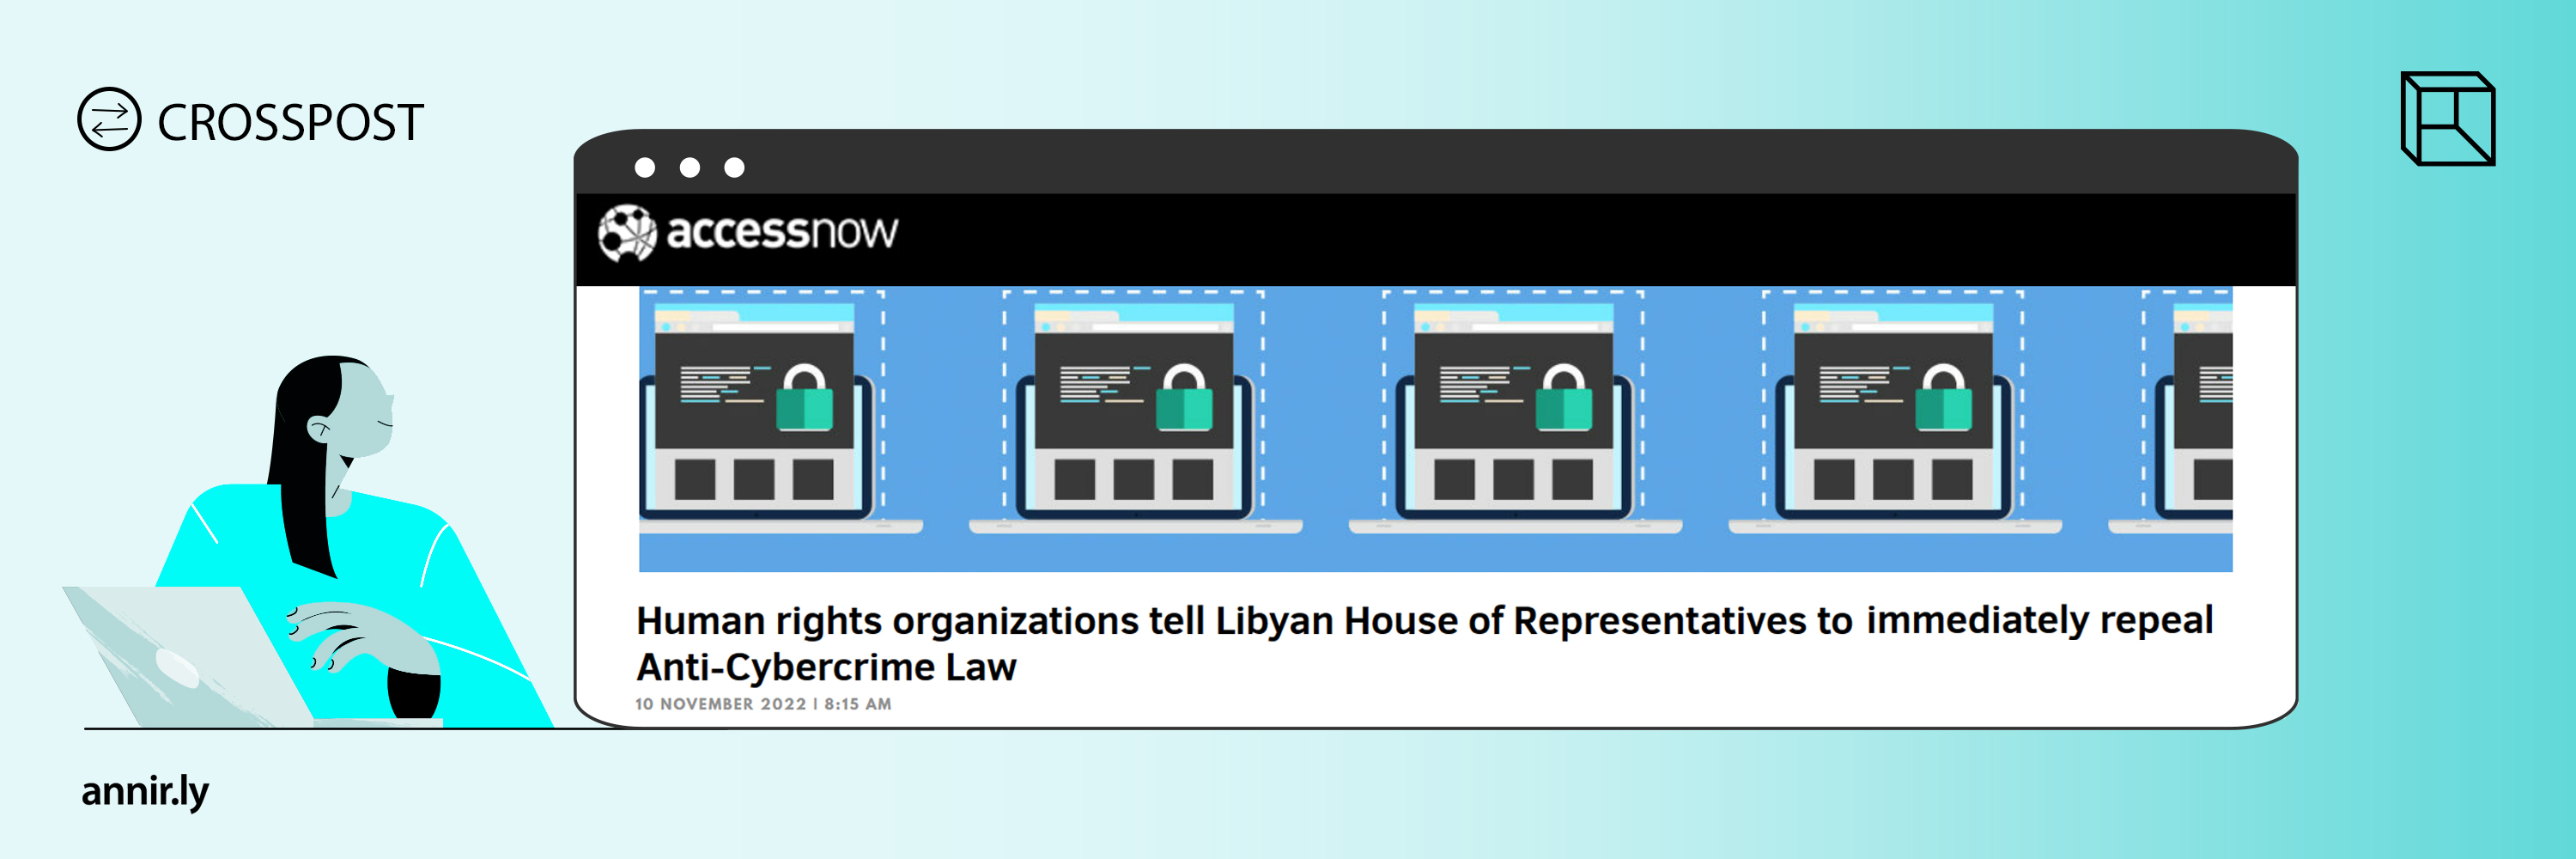 Human rights organizations tell Libyan House of Representatives to immediately repeal Anti-Cybercrime Law